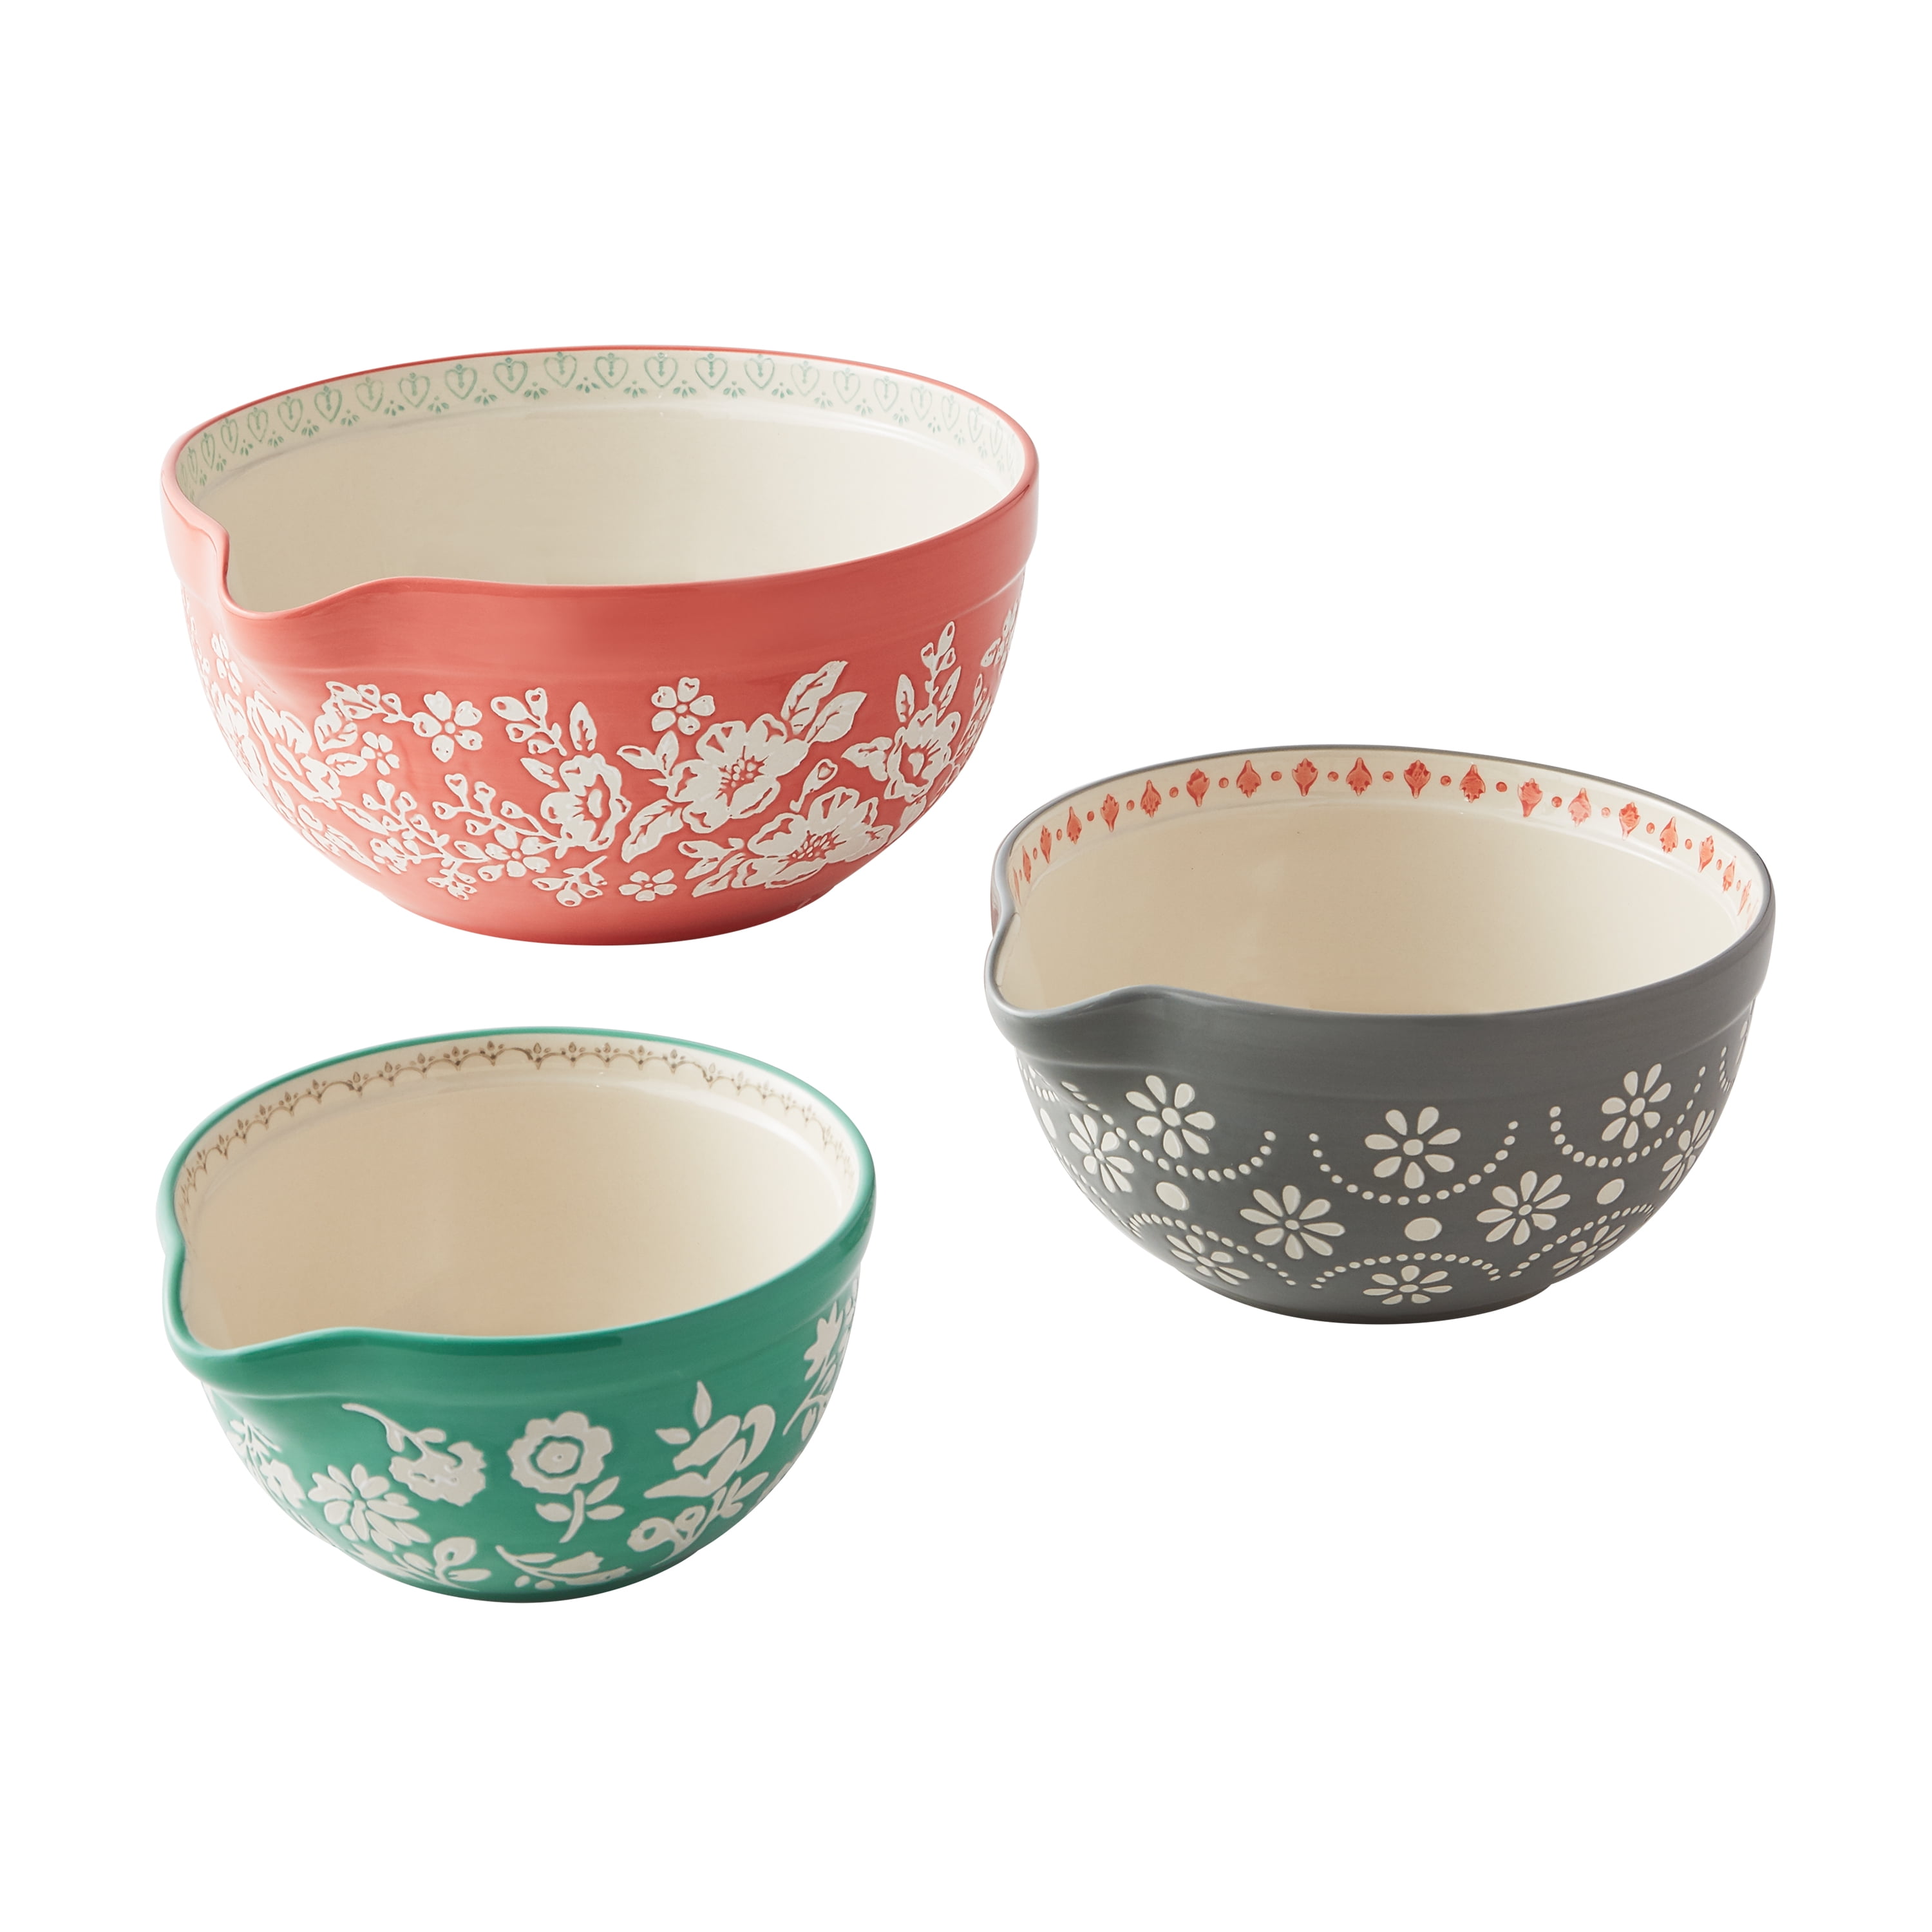 Pioneer Woman Stoneware Floral Nesting Mixing Bowls - Set of 3